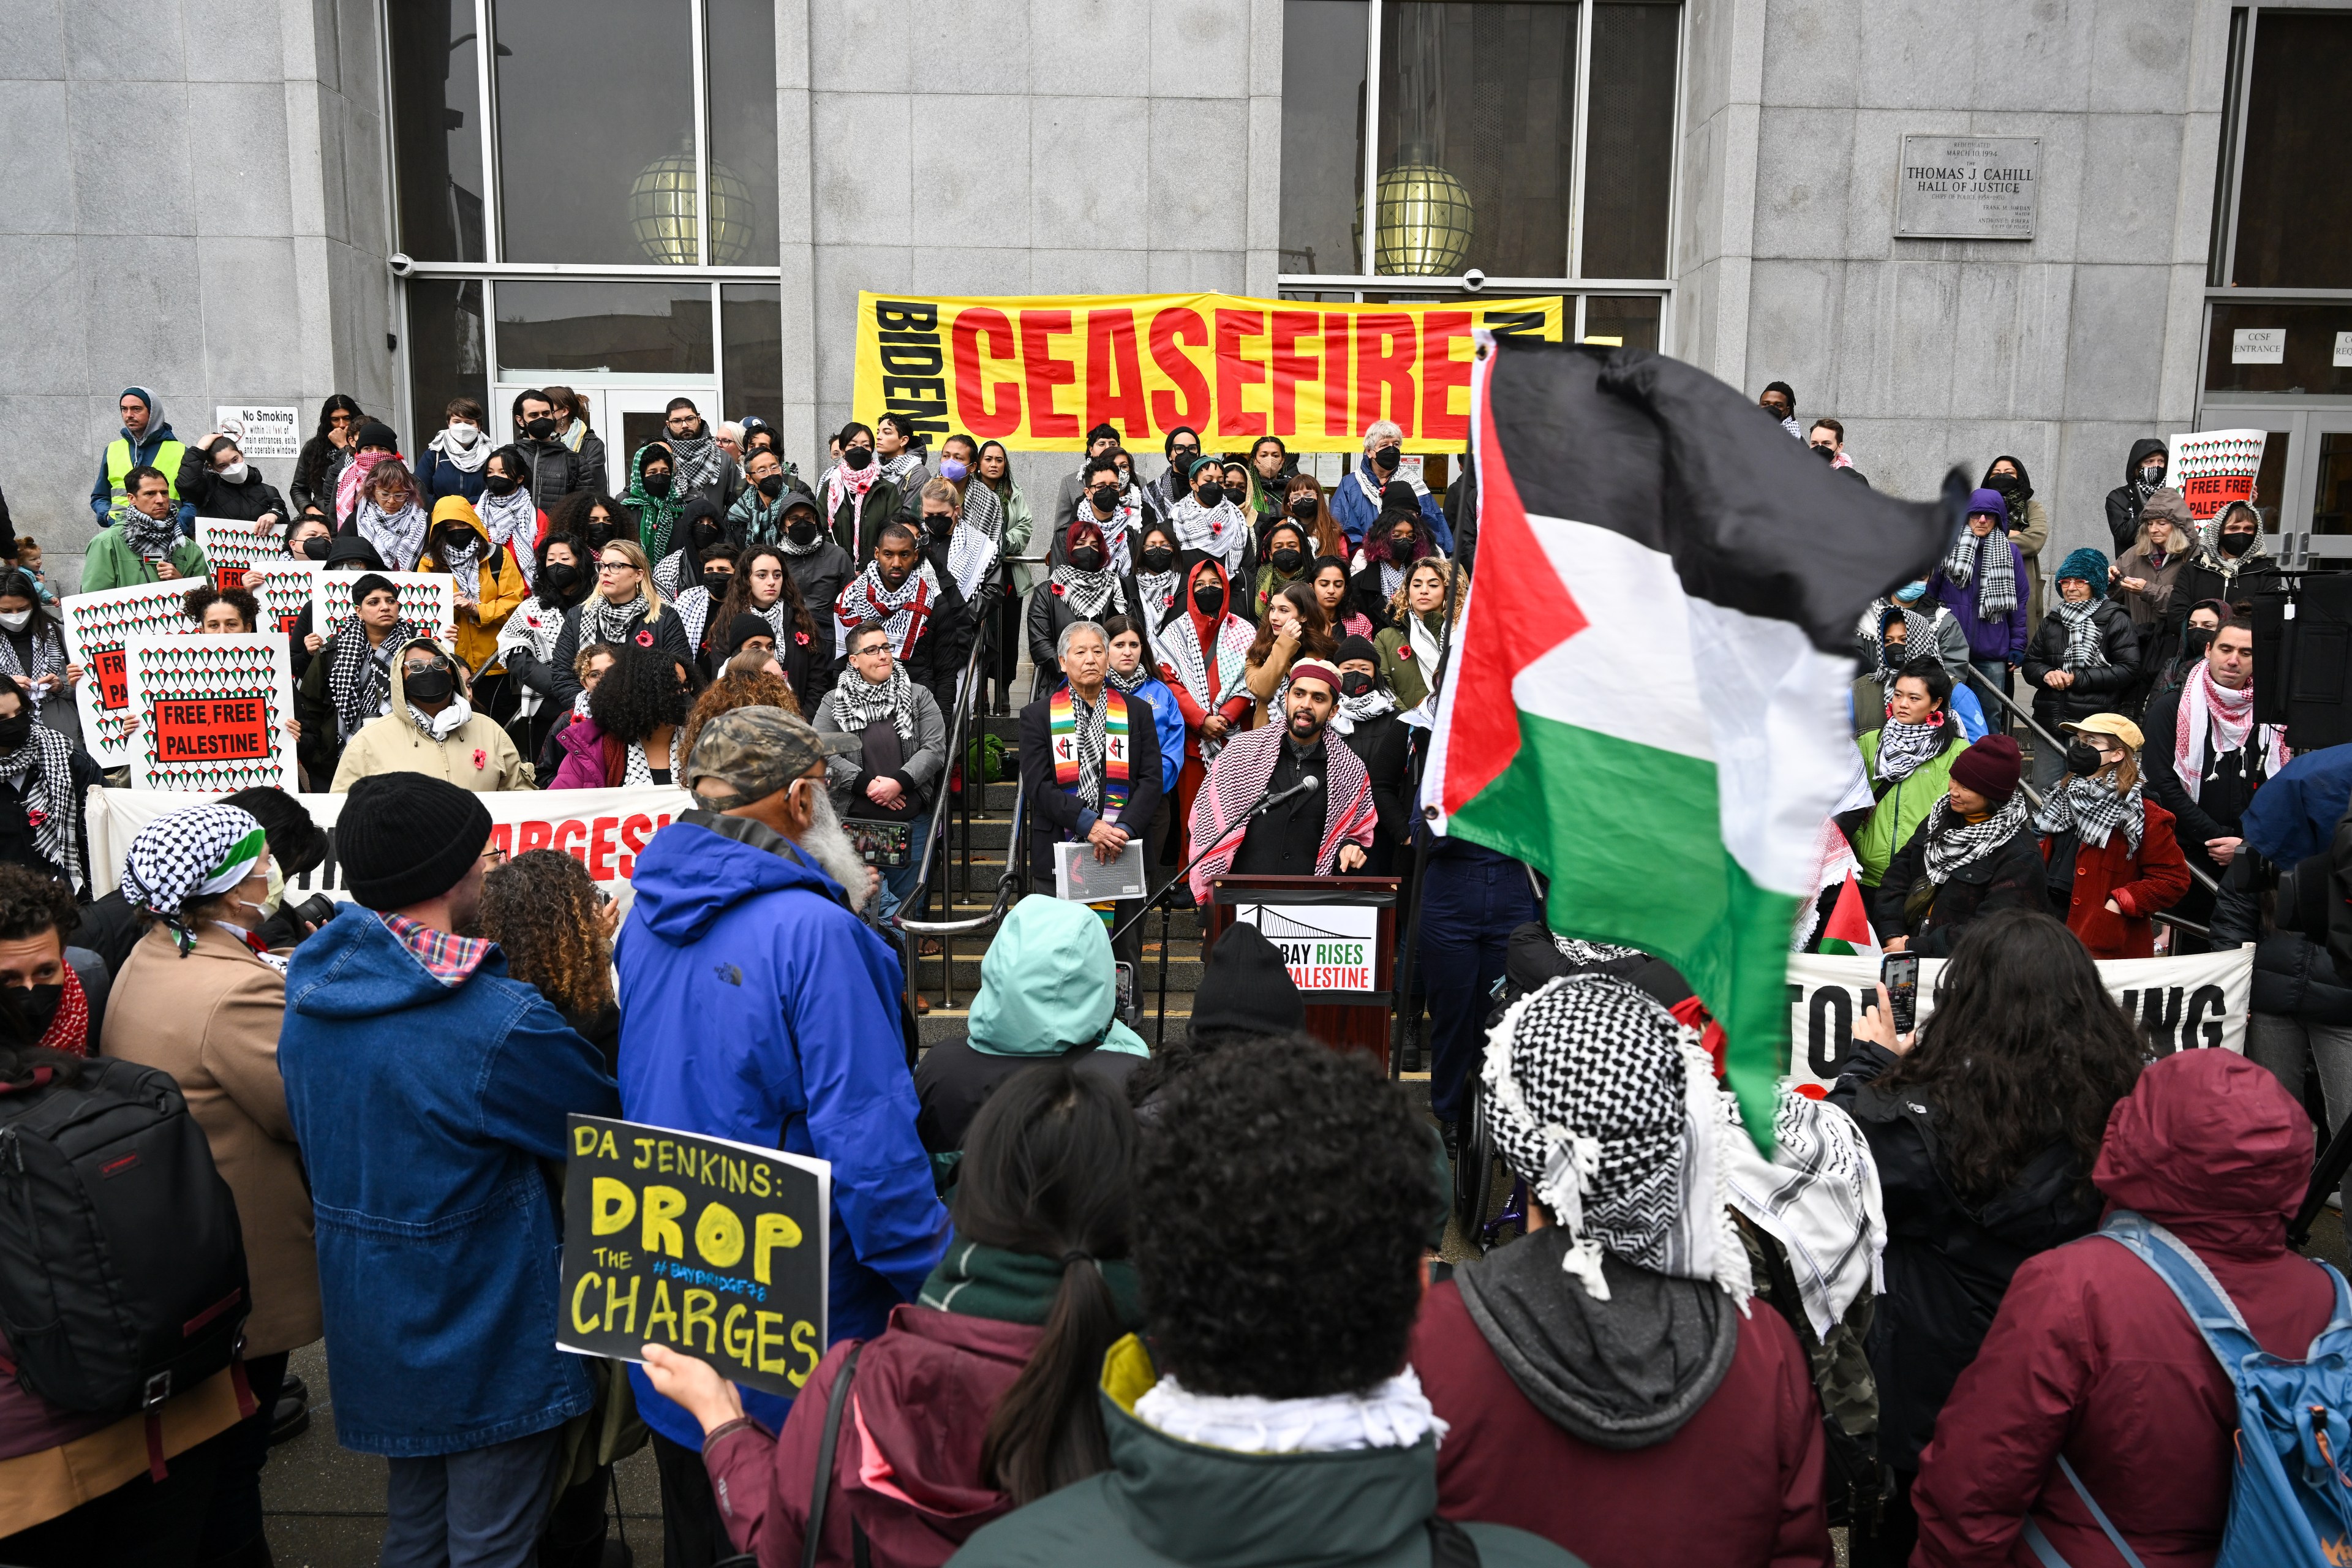 A crowd gathers on steps Superior Court in San Francisco with banners that read "BIDEN CEASEFIRE", "DA JENKINS DROP THE CHARGES" along with a Palestinian flag waving in the foreground.